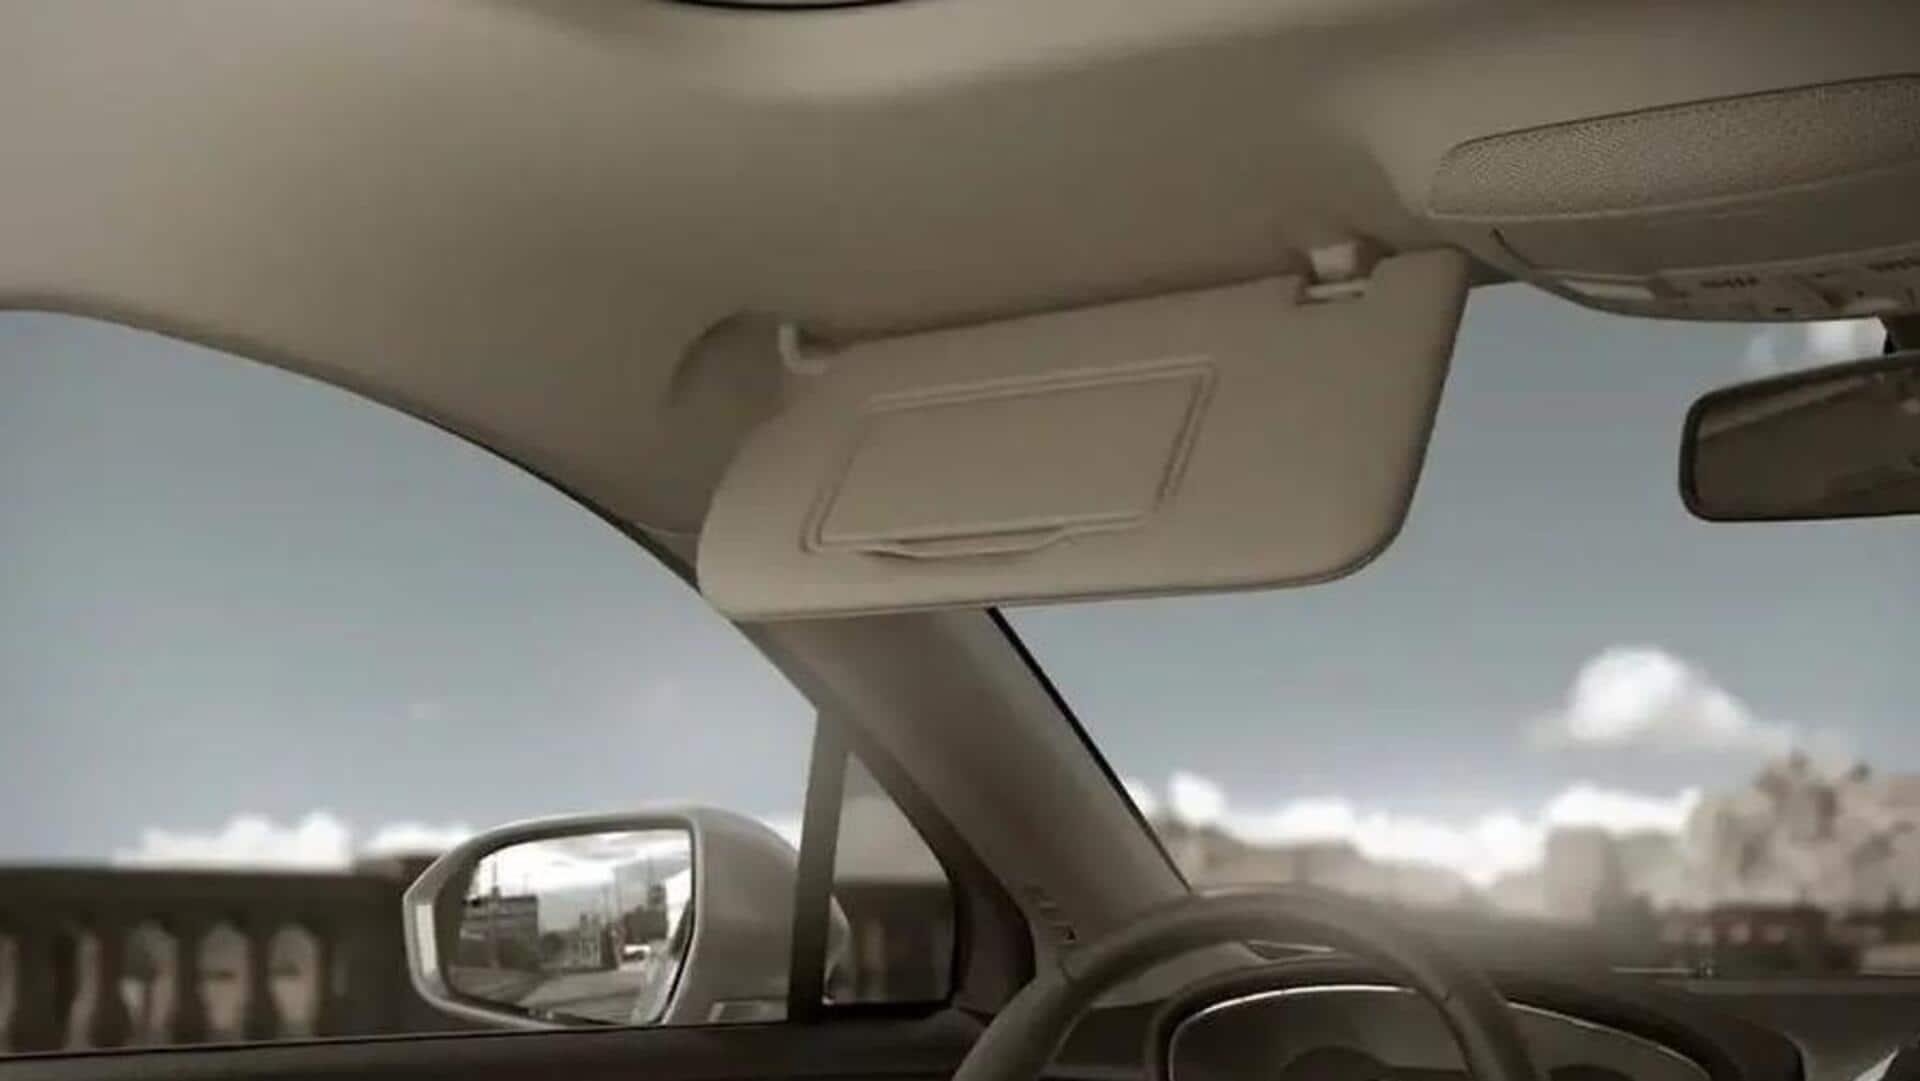 Ford patents innovative sun visor design with glass-breaking feature